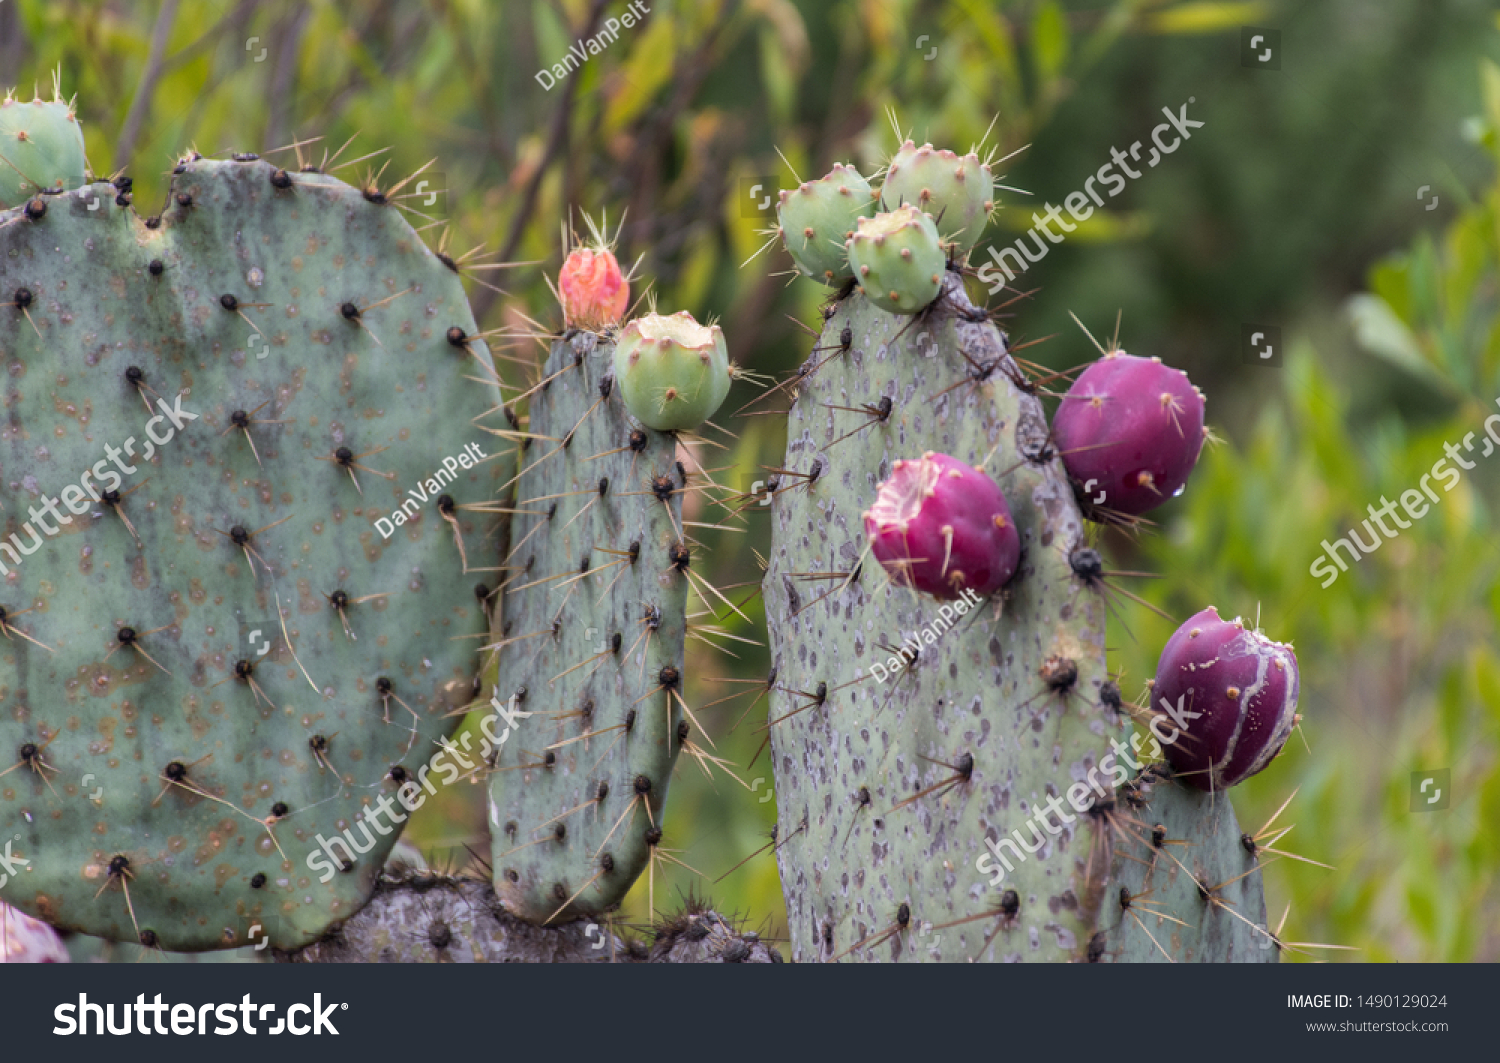 Purple Green Cactus Buds El Charco Nature Parks Outdoor Stock Image